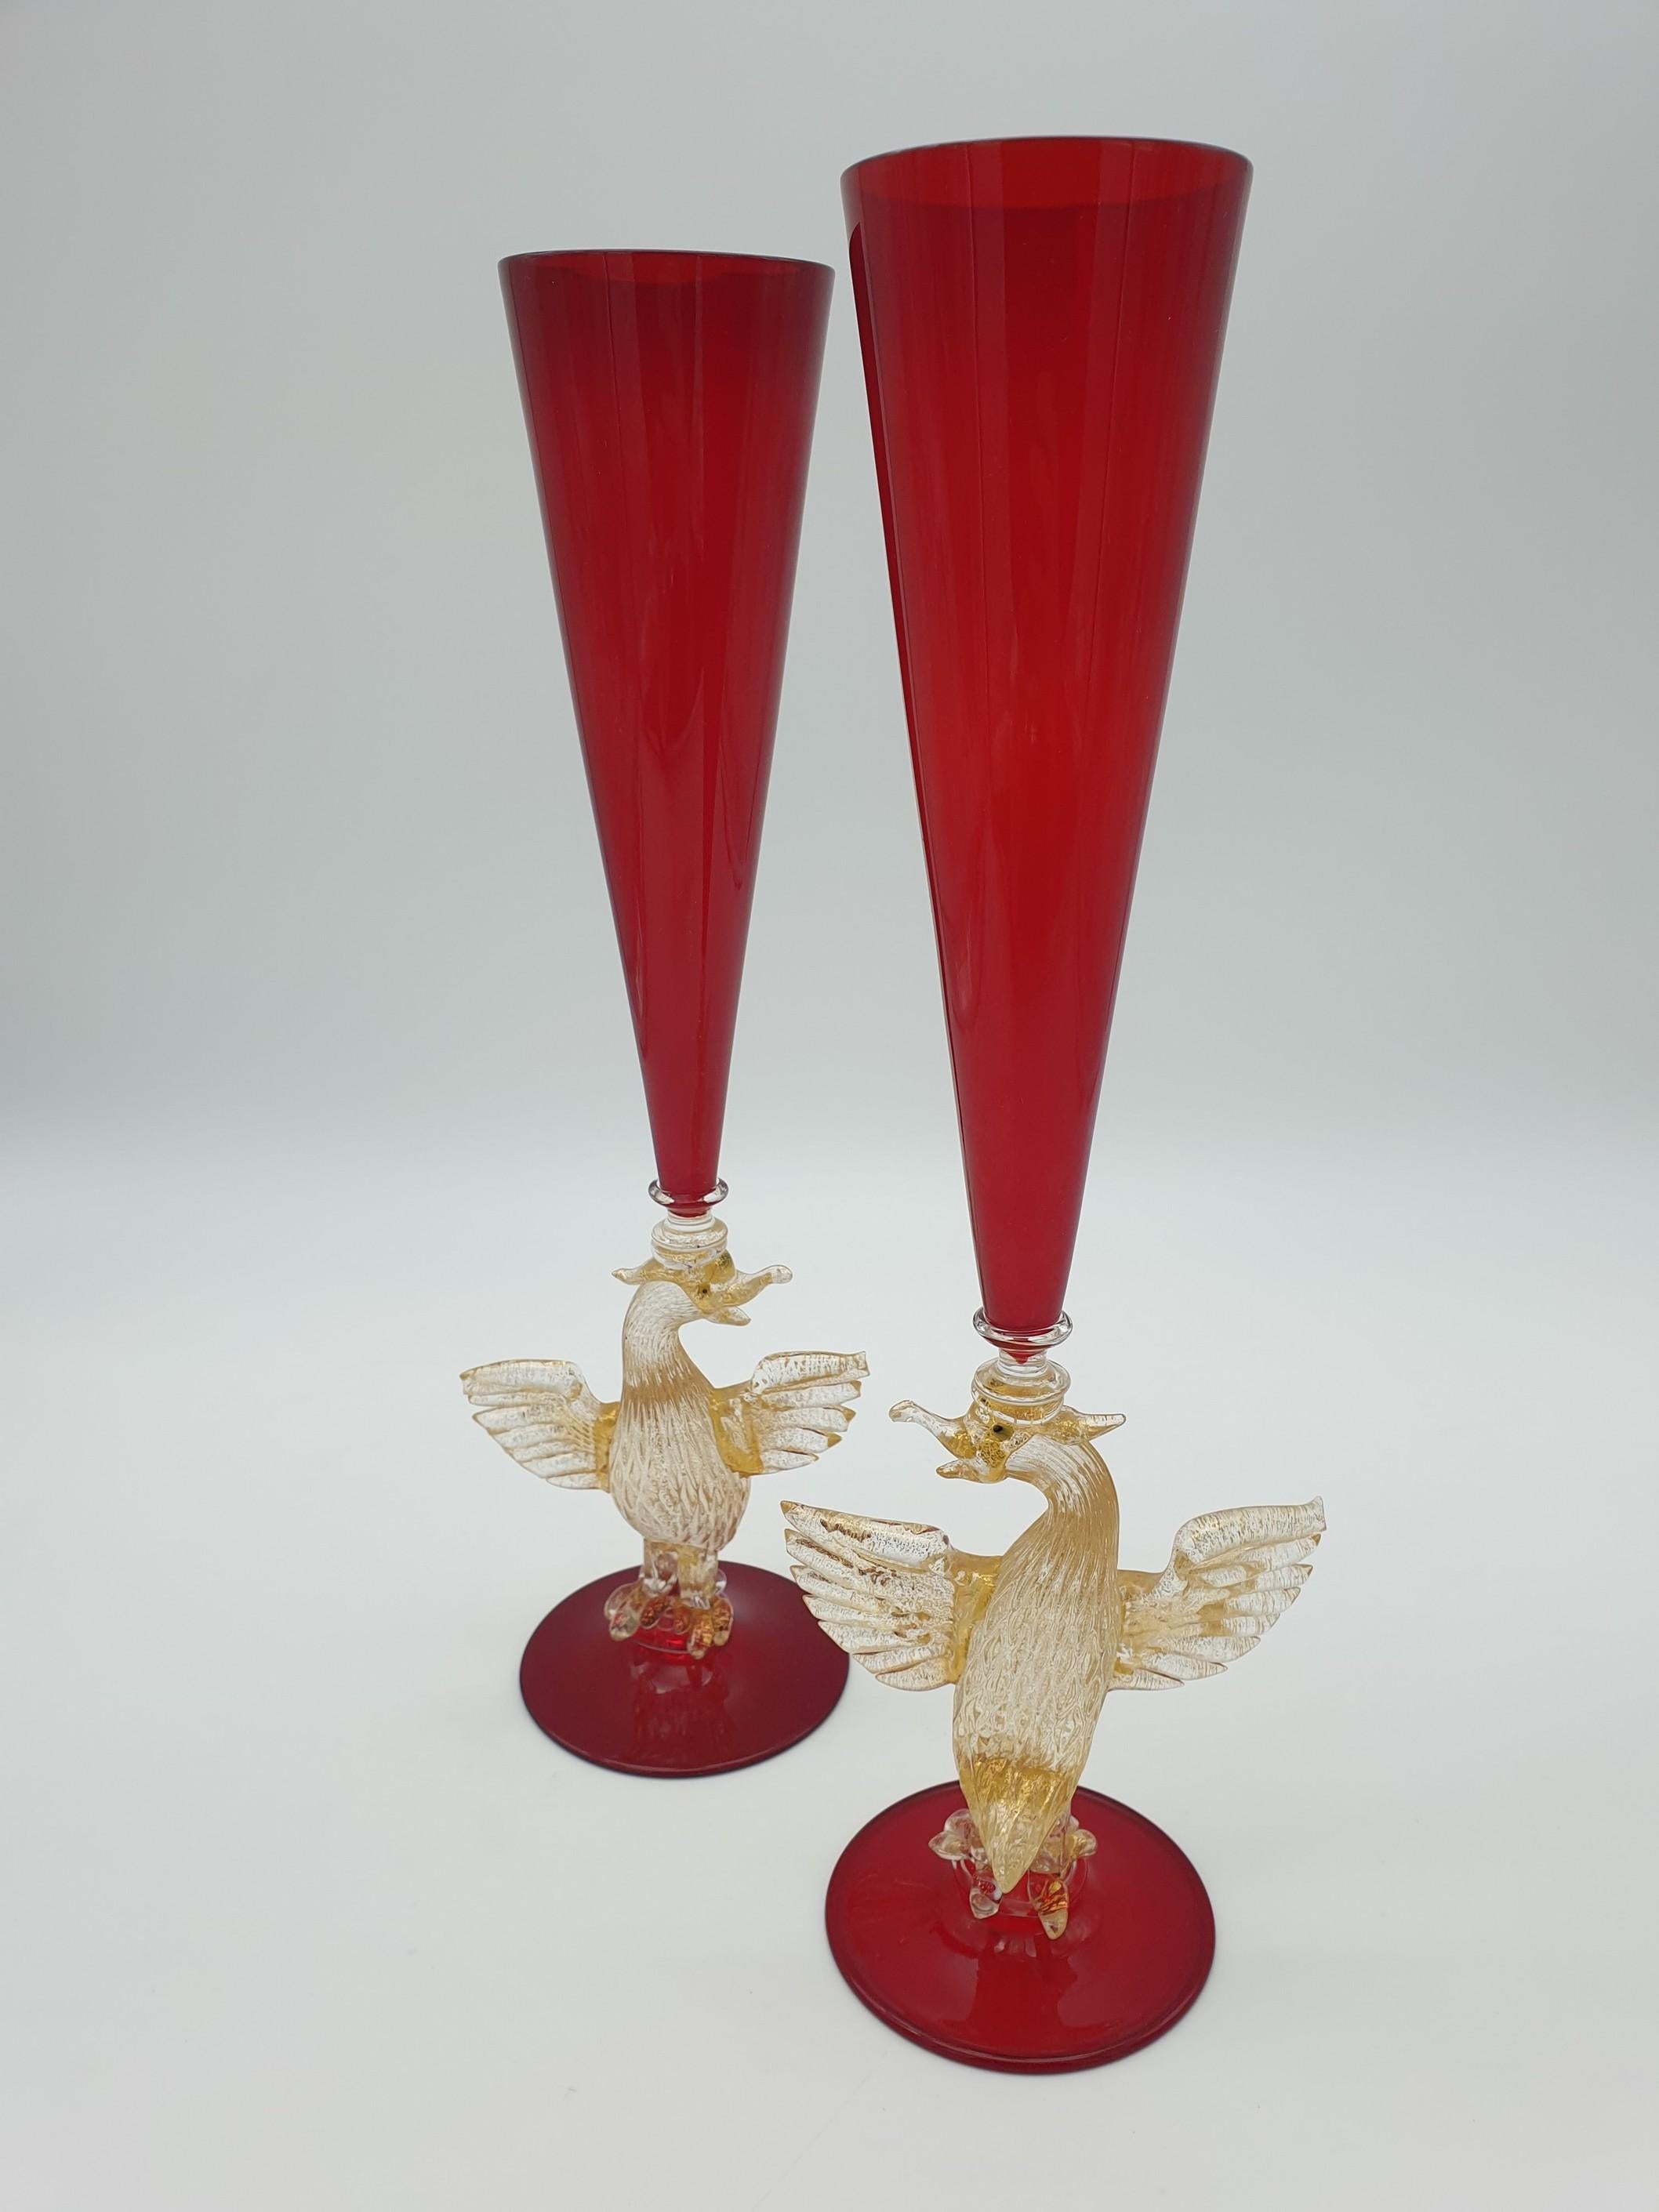 Italian Pair of Modern Murano Glass Red Goblets with Gold Phoenix by Gino Cenedese 1990s For Sale